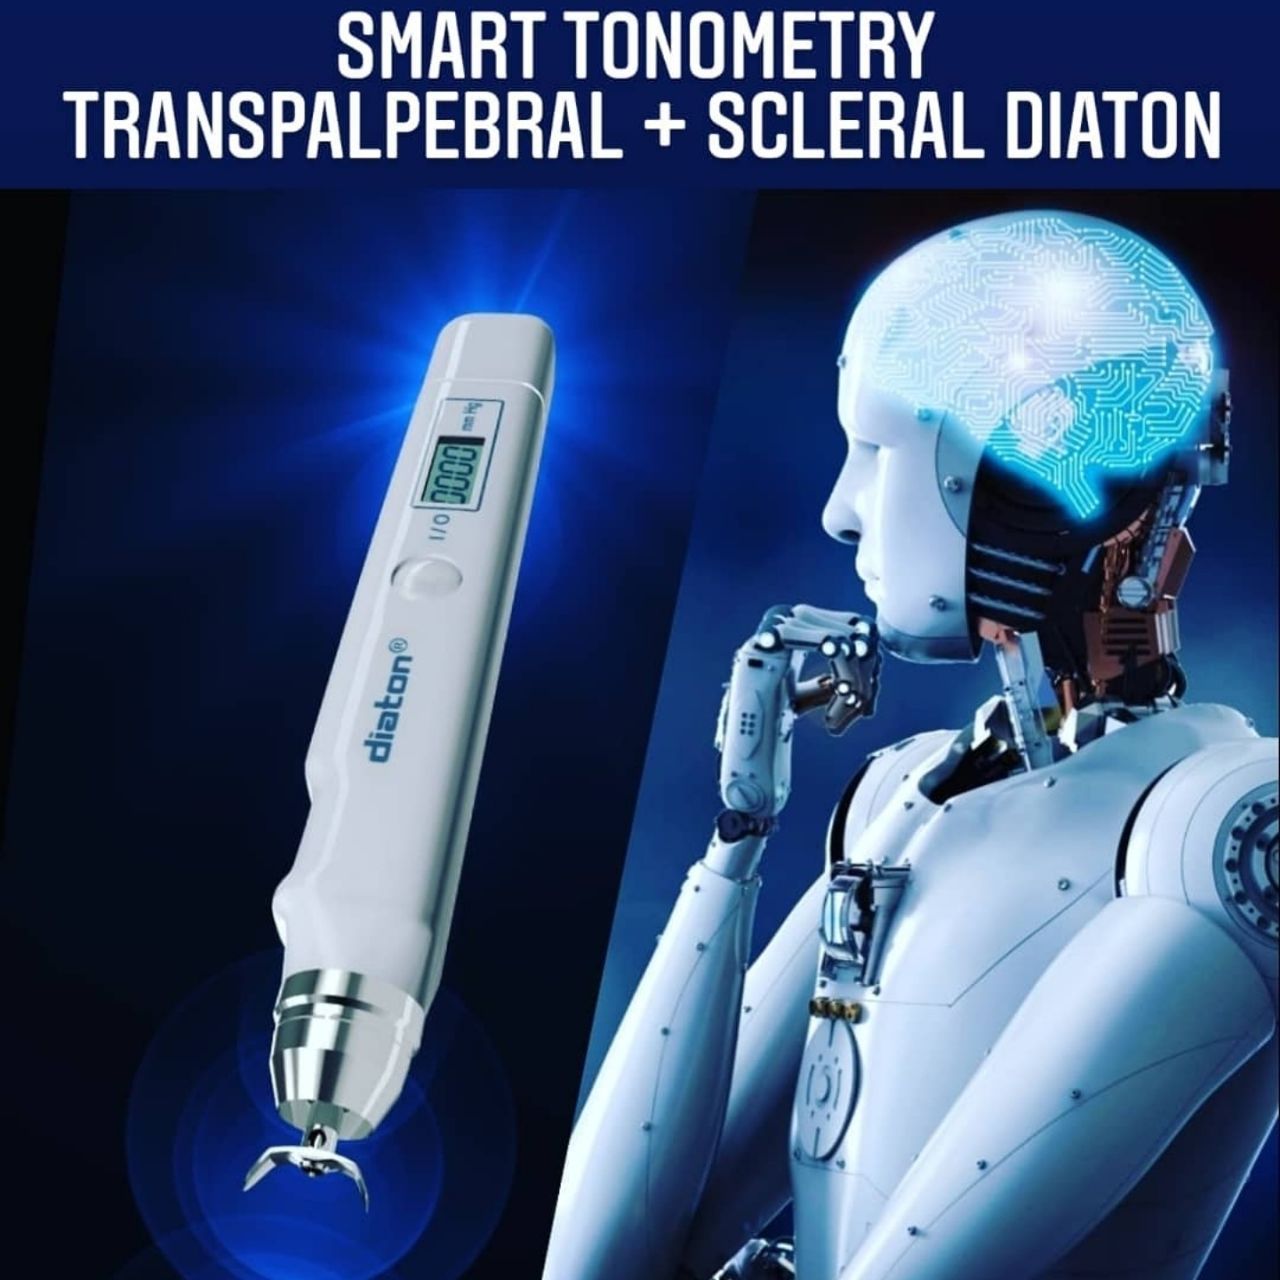 Smart & Safe Transpalpebral + Scleral Tonometry by DIATON Tonometer enables to measure IOP for glaucoma independent of CCT or other corneal biomechanics.